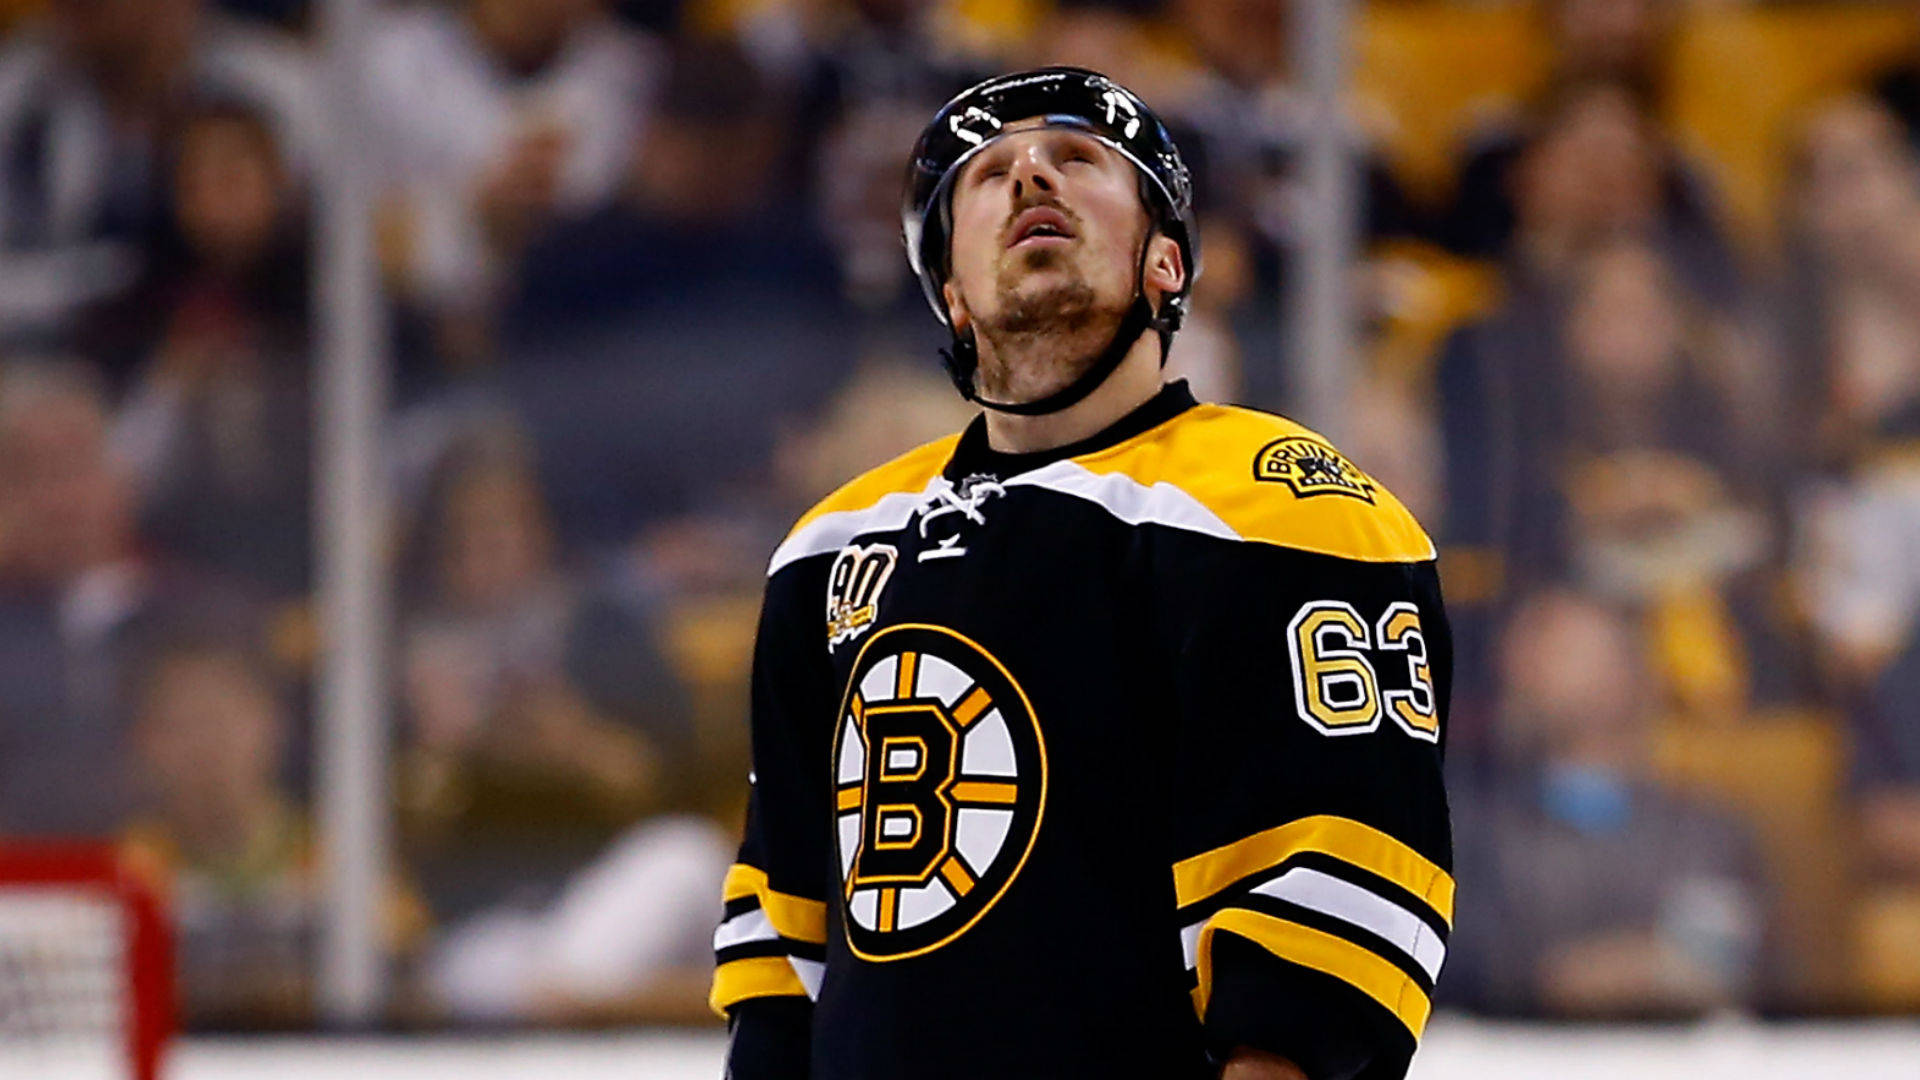 Professional Ice Hockey Star Brad Marchand In Action Background